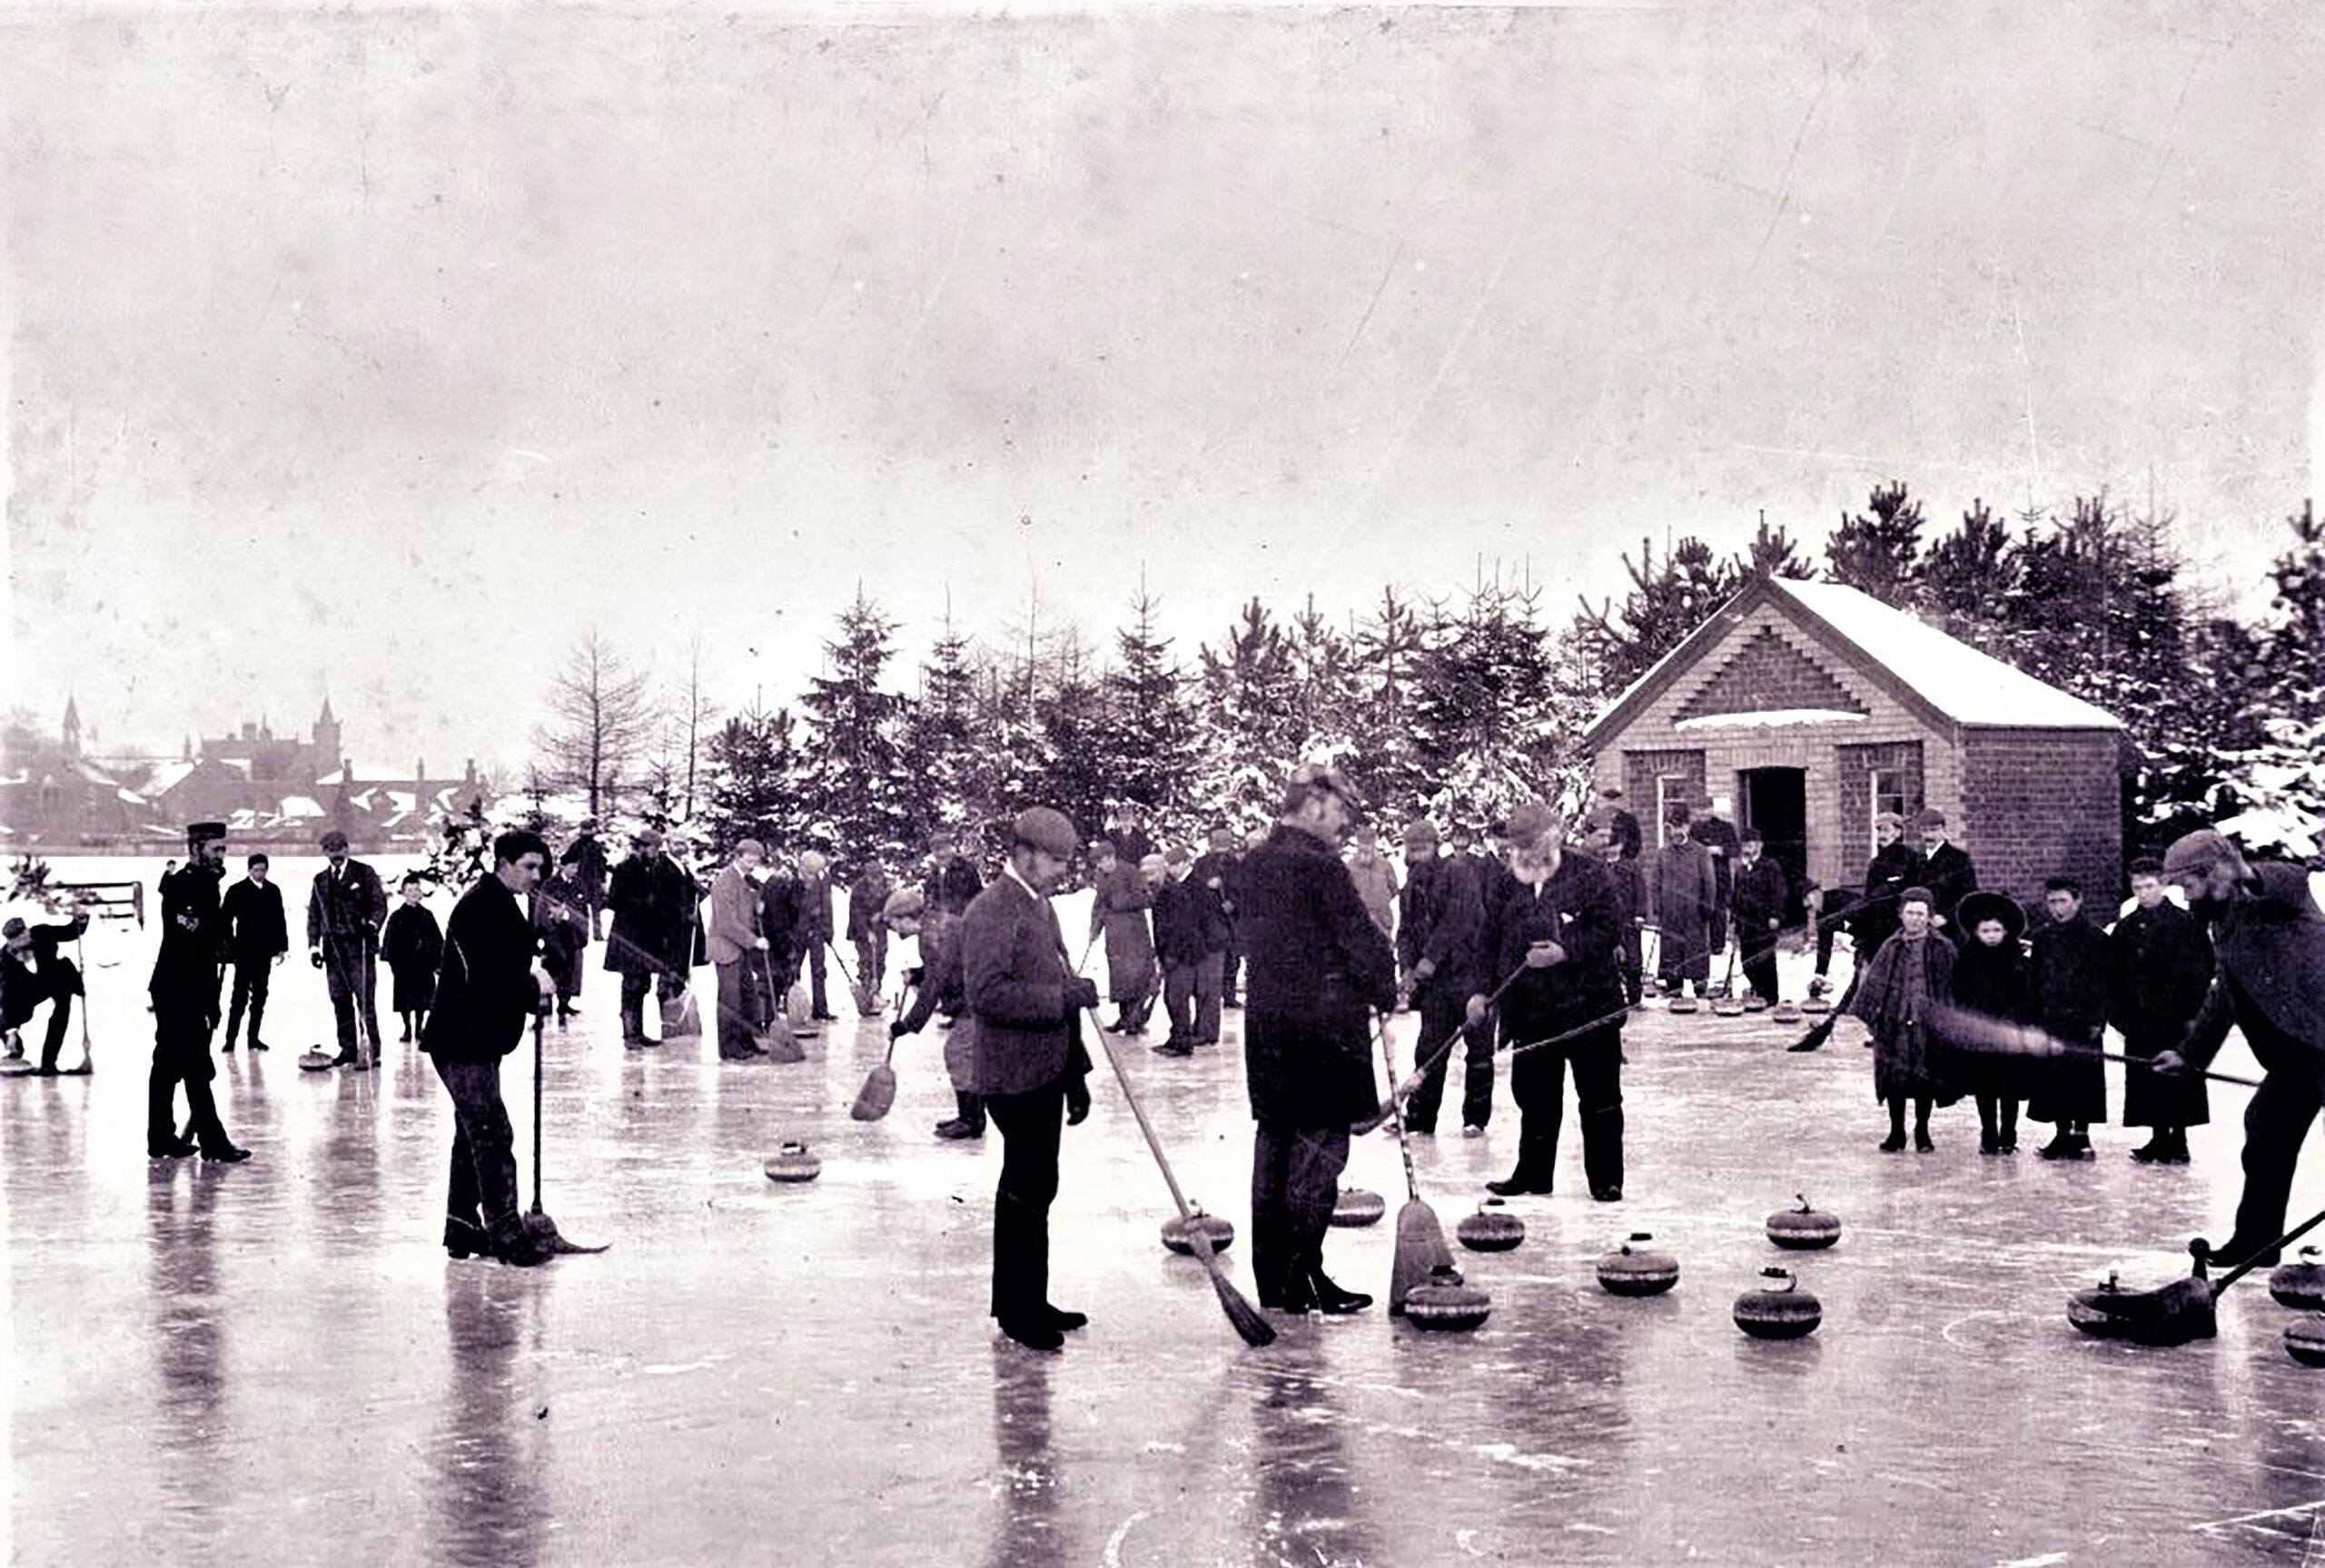 Tayport Heritage Trail - Board 14 - Event on the curling pond early 1900s